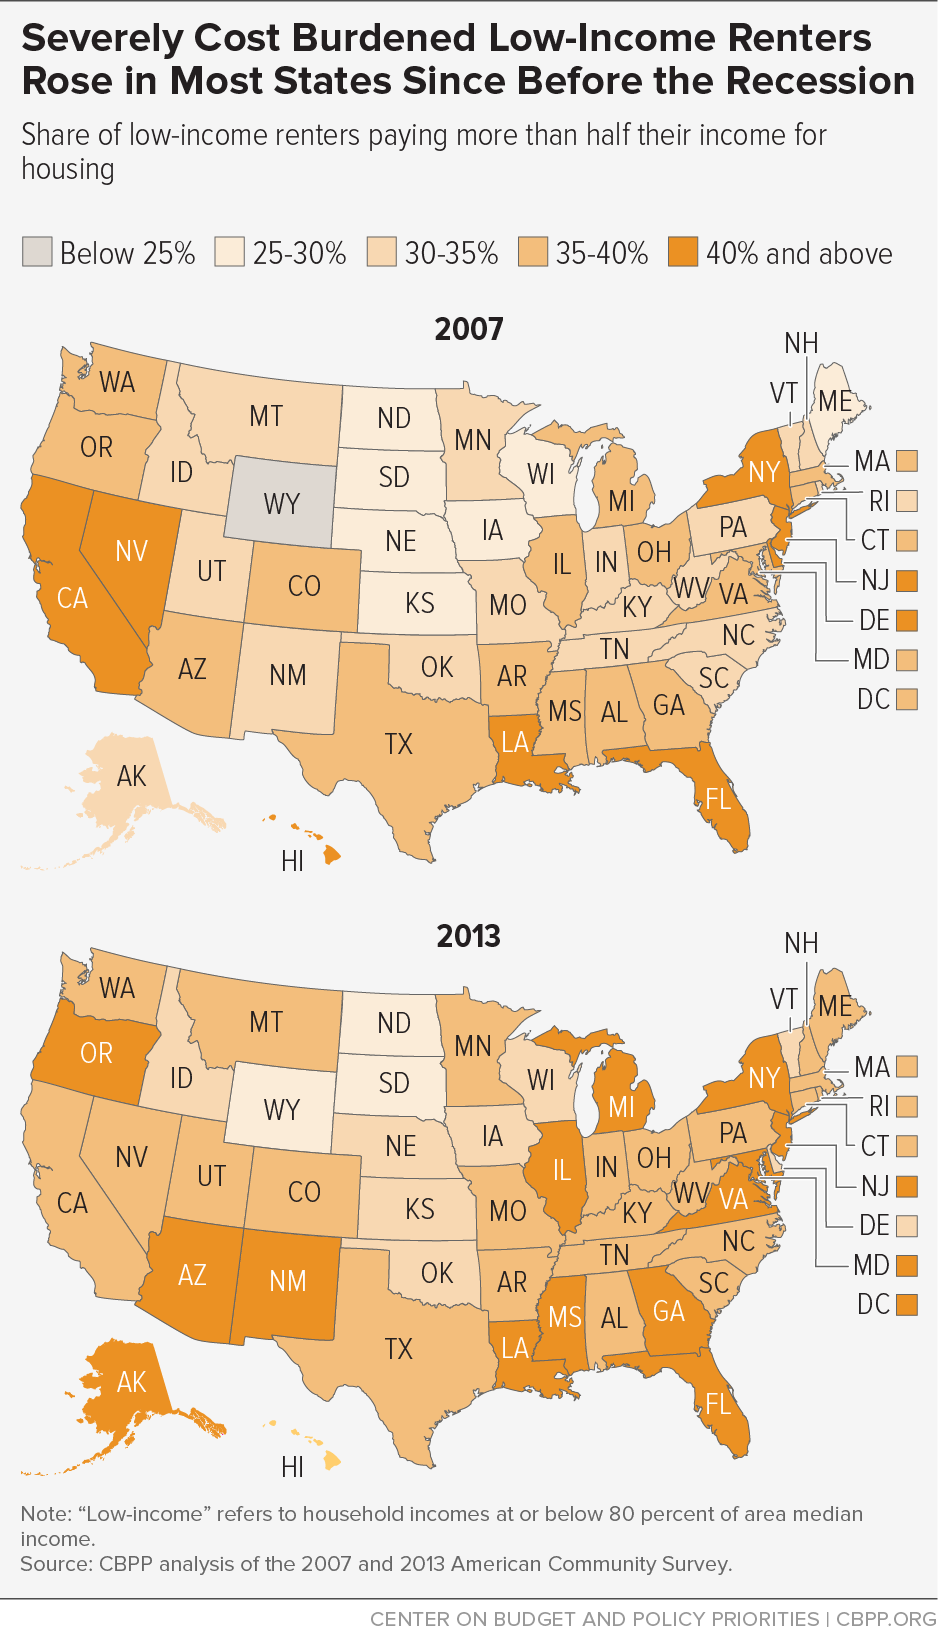 Severely Cost Burdened Low-Income Renters Rose in Most States Since Before the Recession